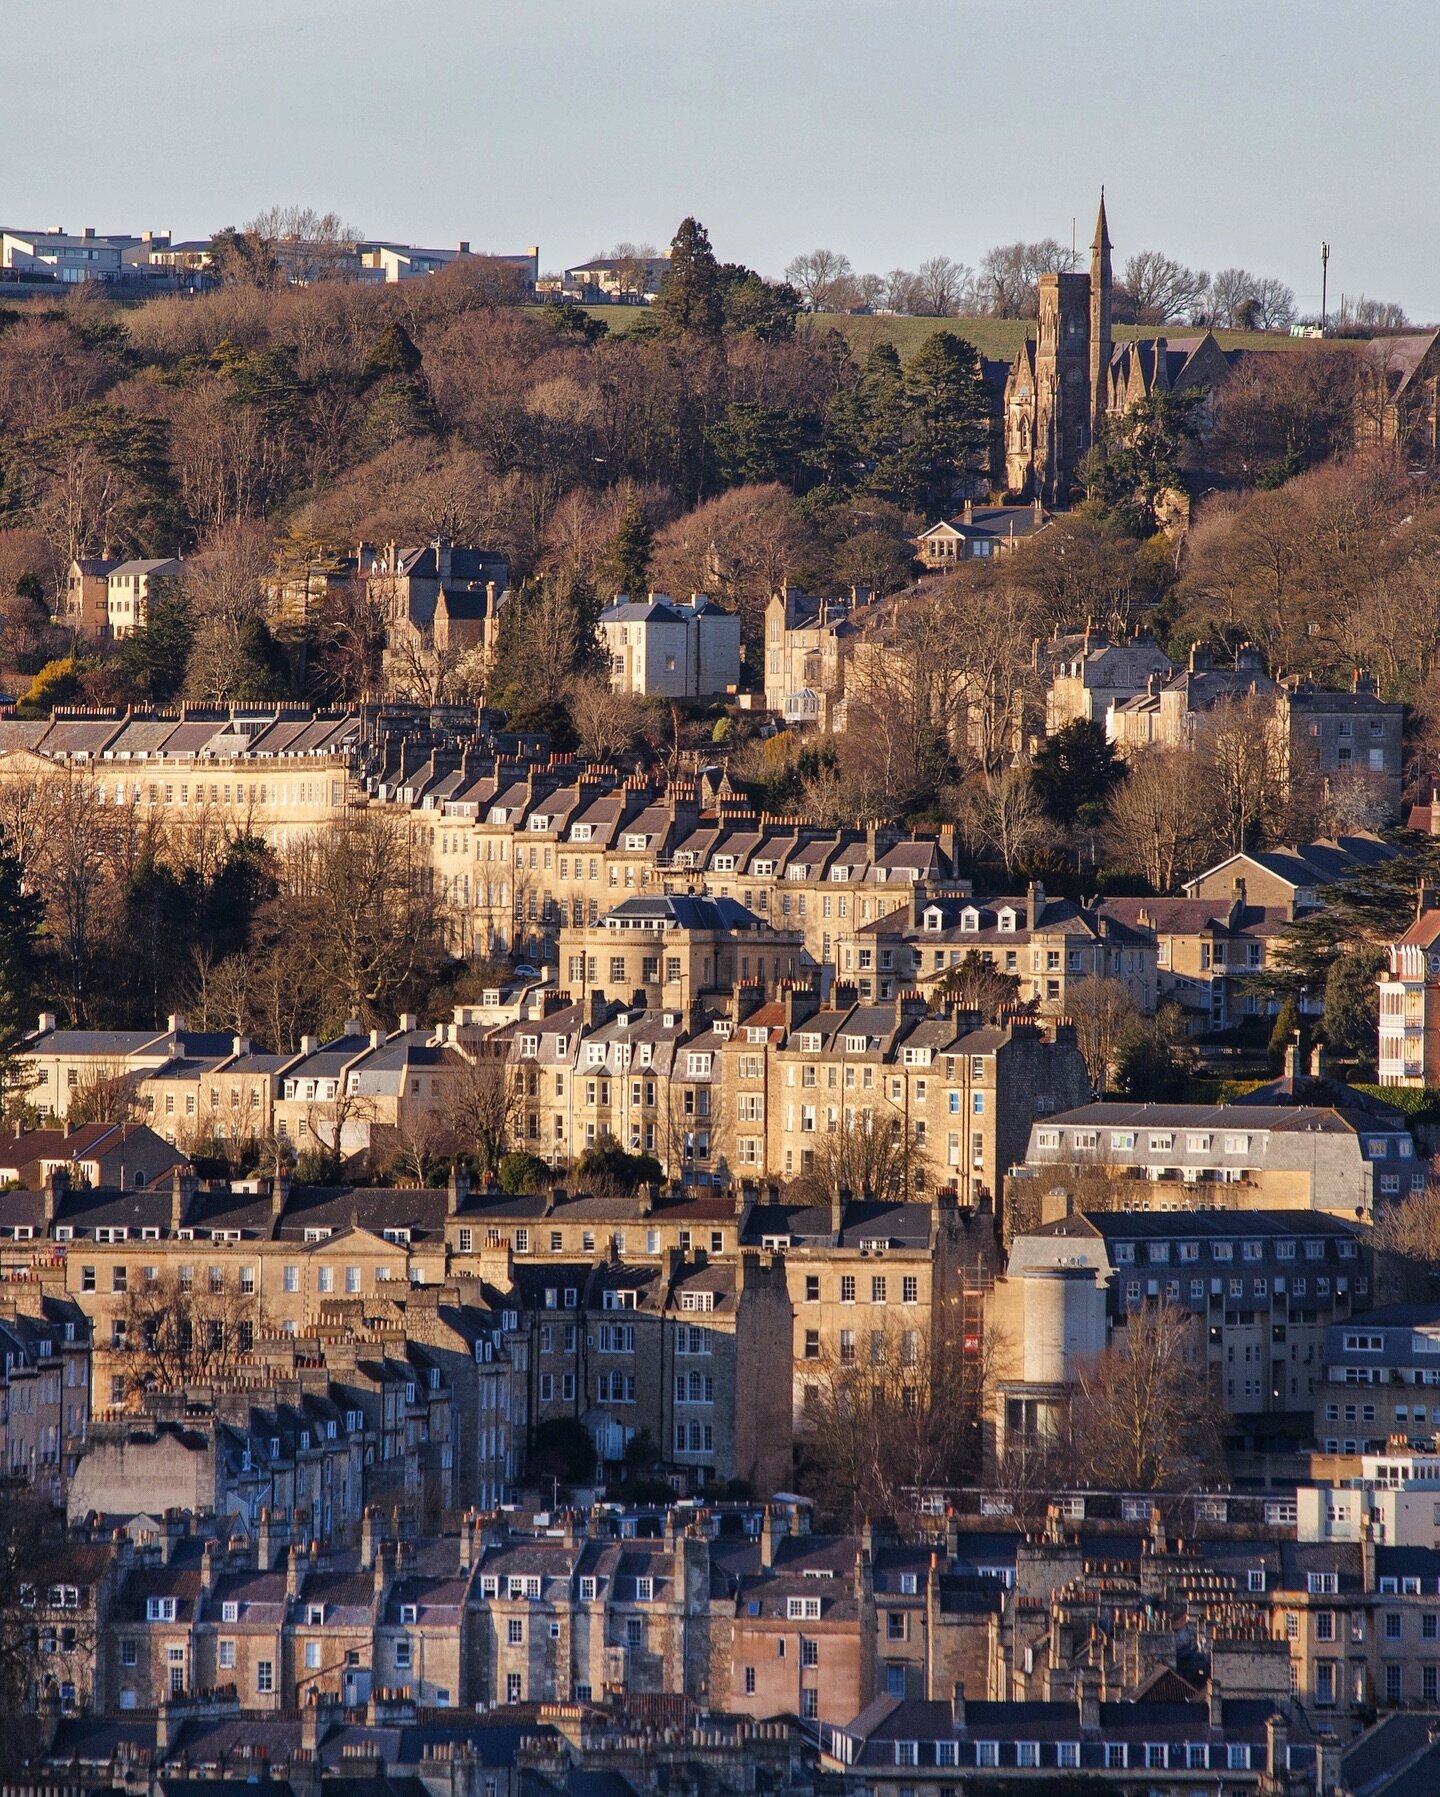 Welcome to Bath where every view is as beautiful as the next 😍

As we head into spring scenes like this will soon be peppered with green foliage from trees and shrubs, gardens will be blooming and blossom aplenty. So during the last (soggy) days of 